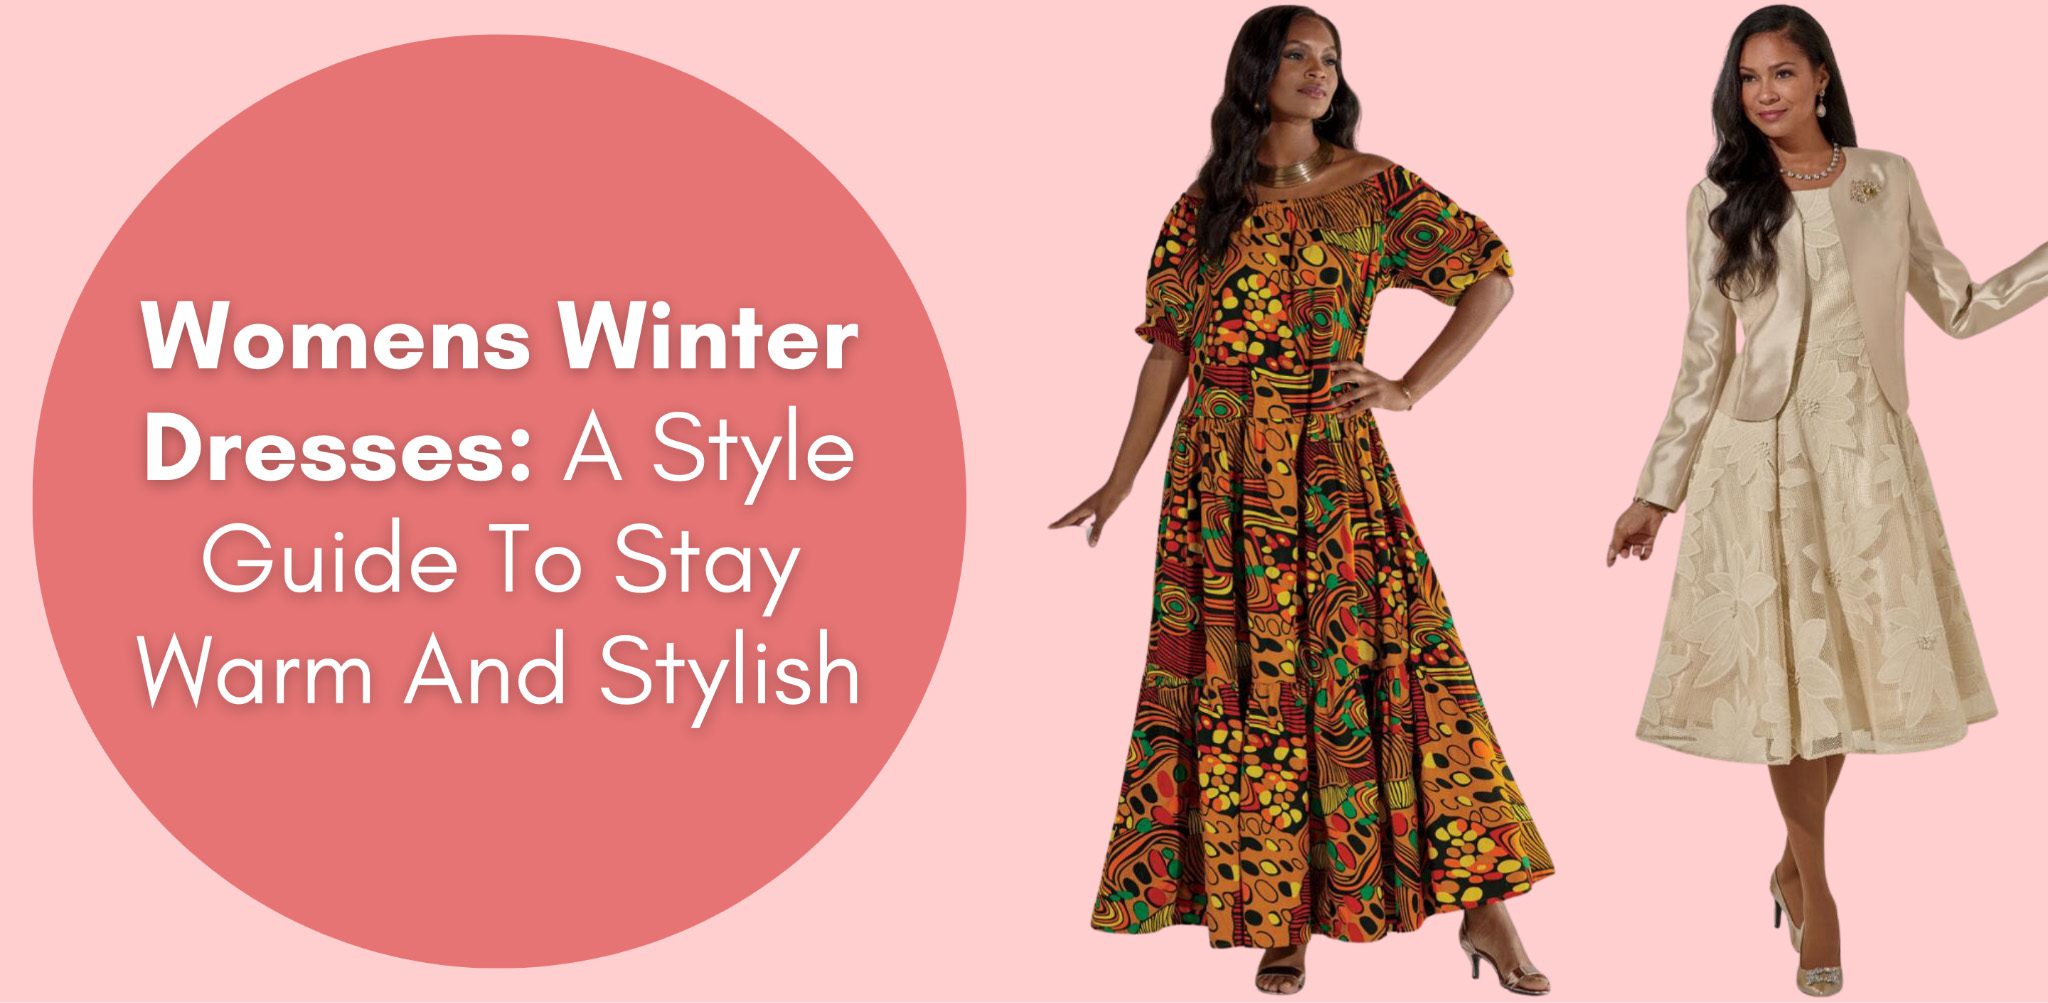 Womens Winter Dresses: A Style Guide To Stay Warm And Stylish